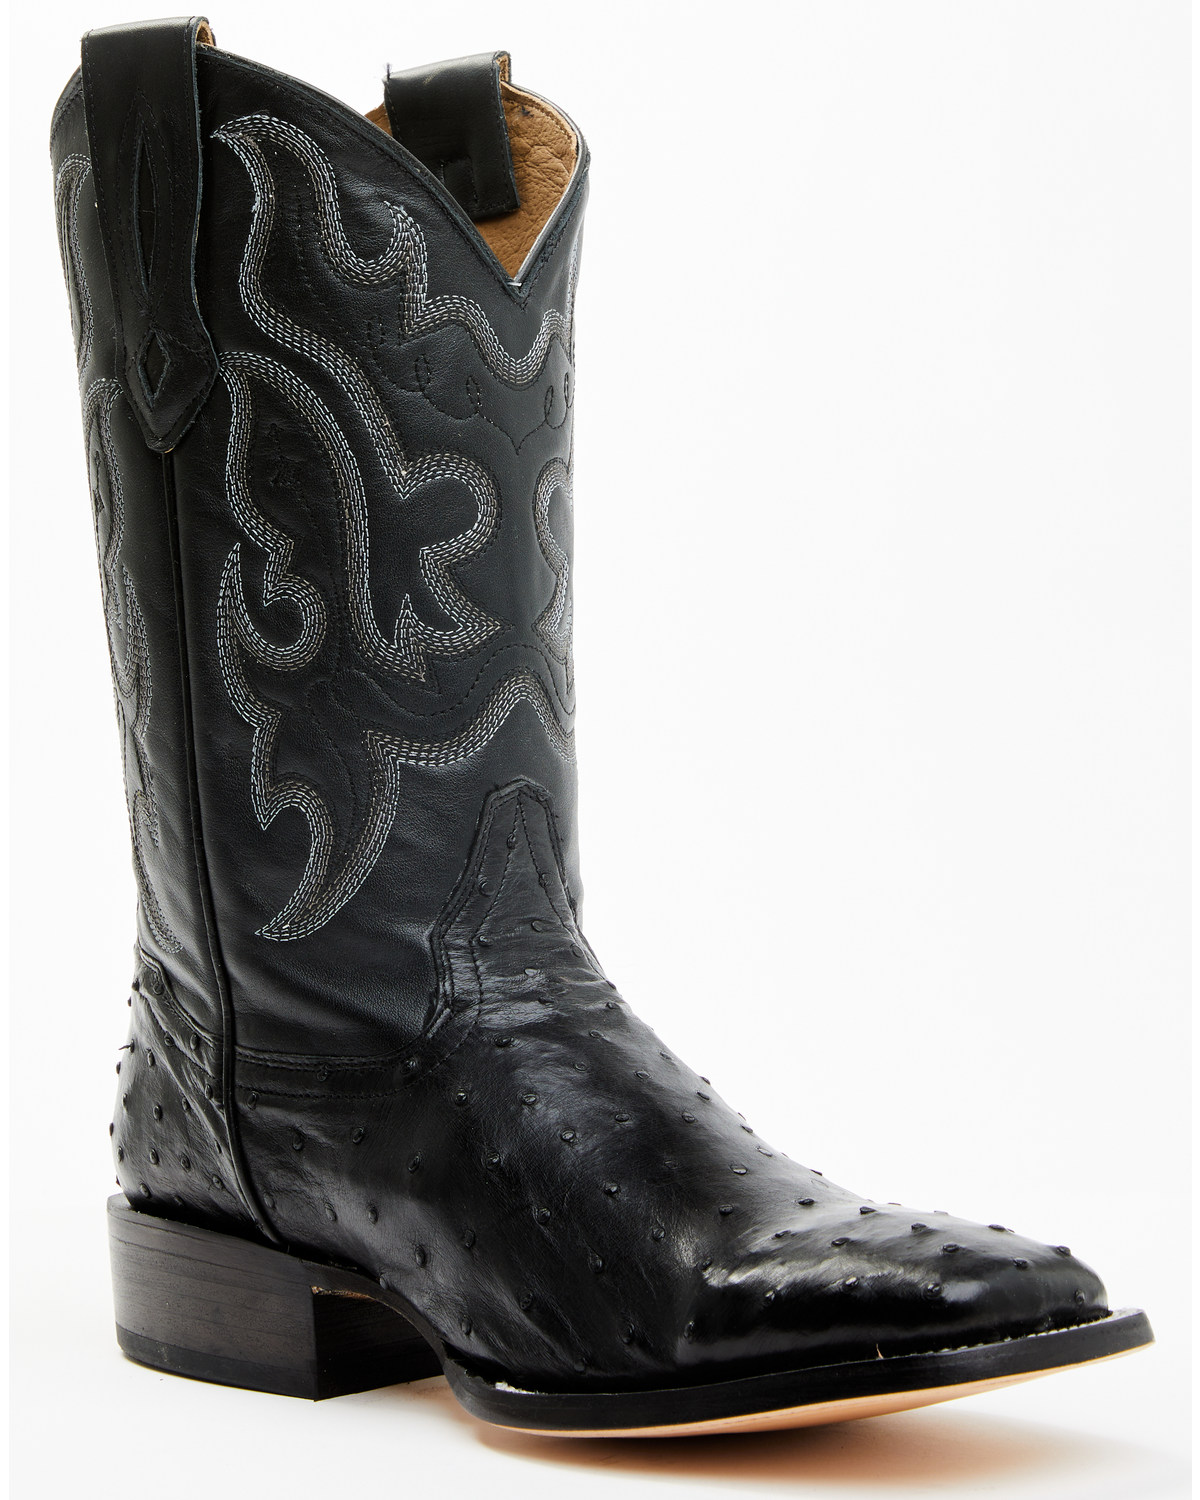 Cody James Men's Exotic Full Quill Ostrich Western Boots